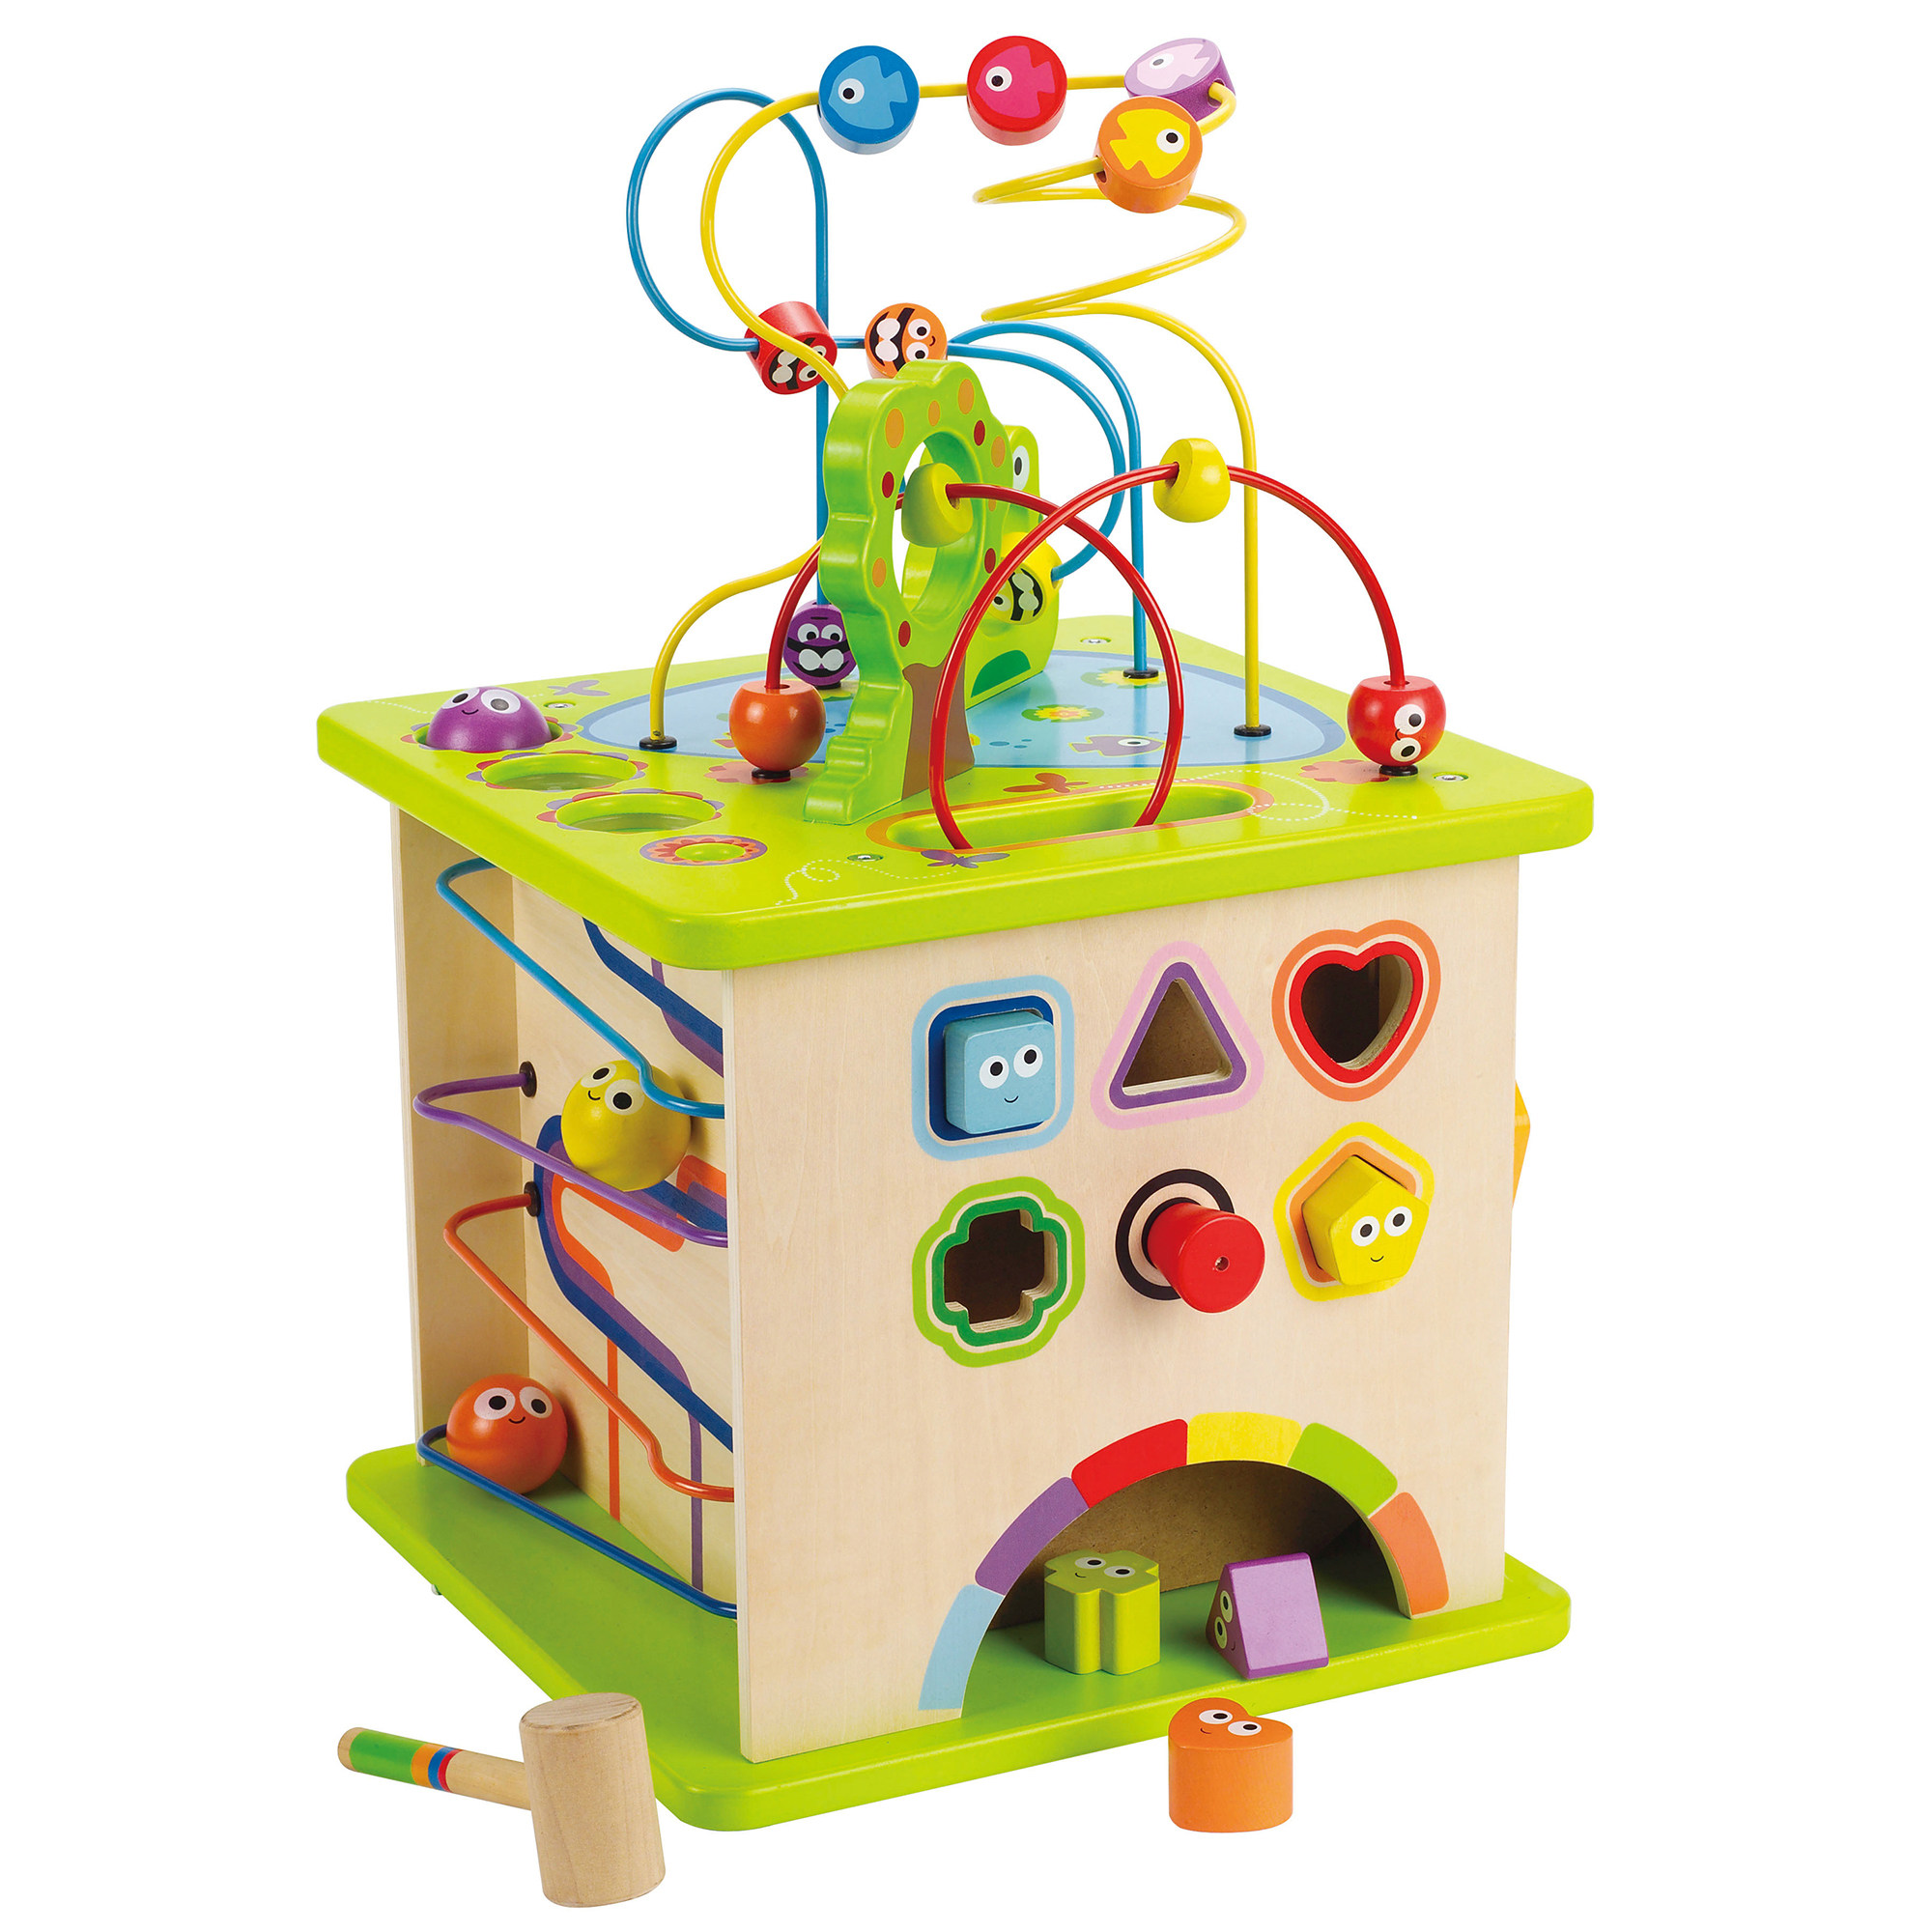 Hape Country Critters 5-Sided Wooden Play Cube for Toddlers, Ages 12 mo+ - image 1 of 8